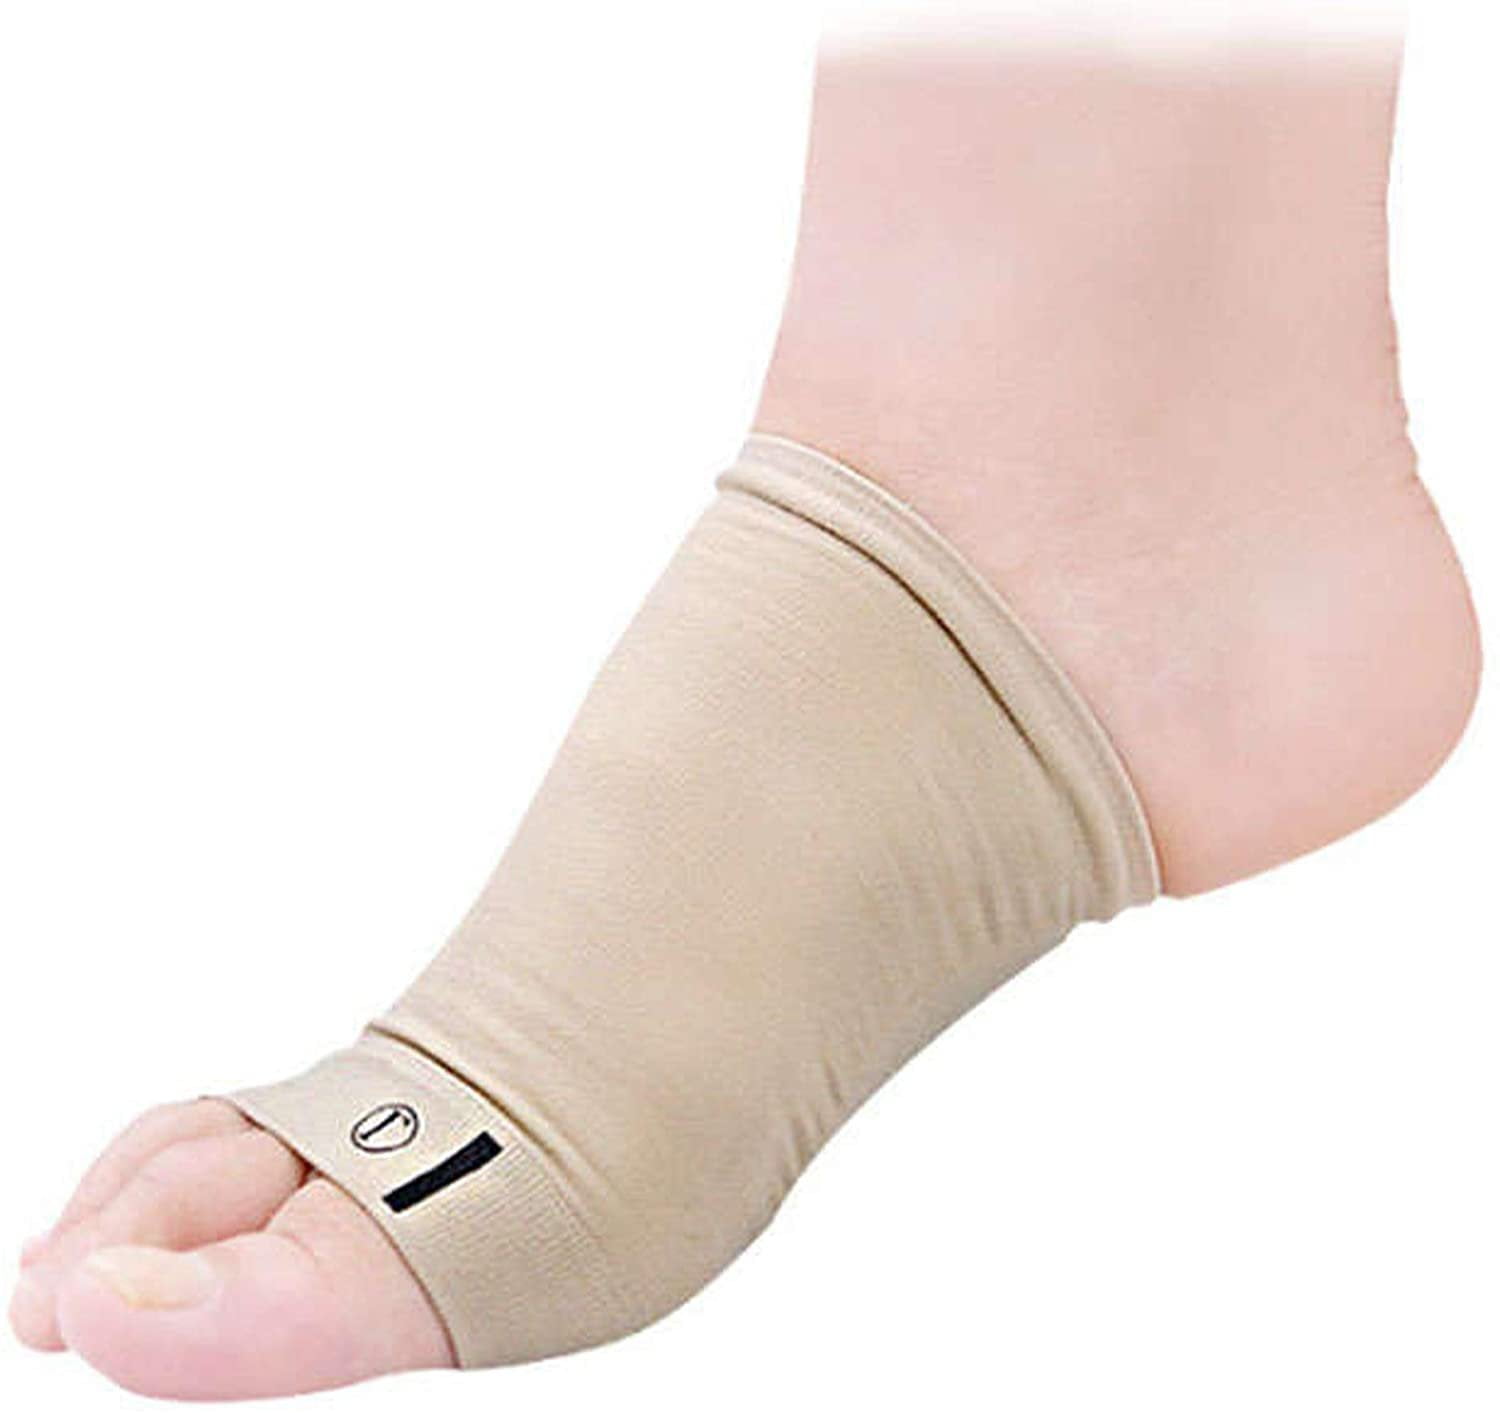 Arthritis Foot Pain Relief Support Socks Foot Straps Cushion LC 